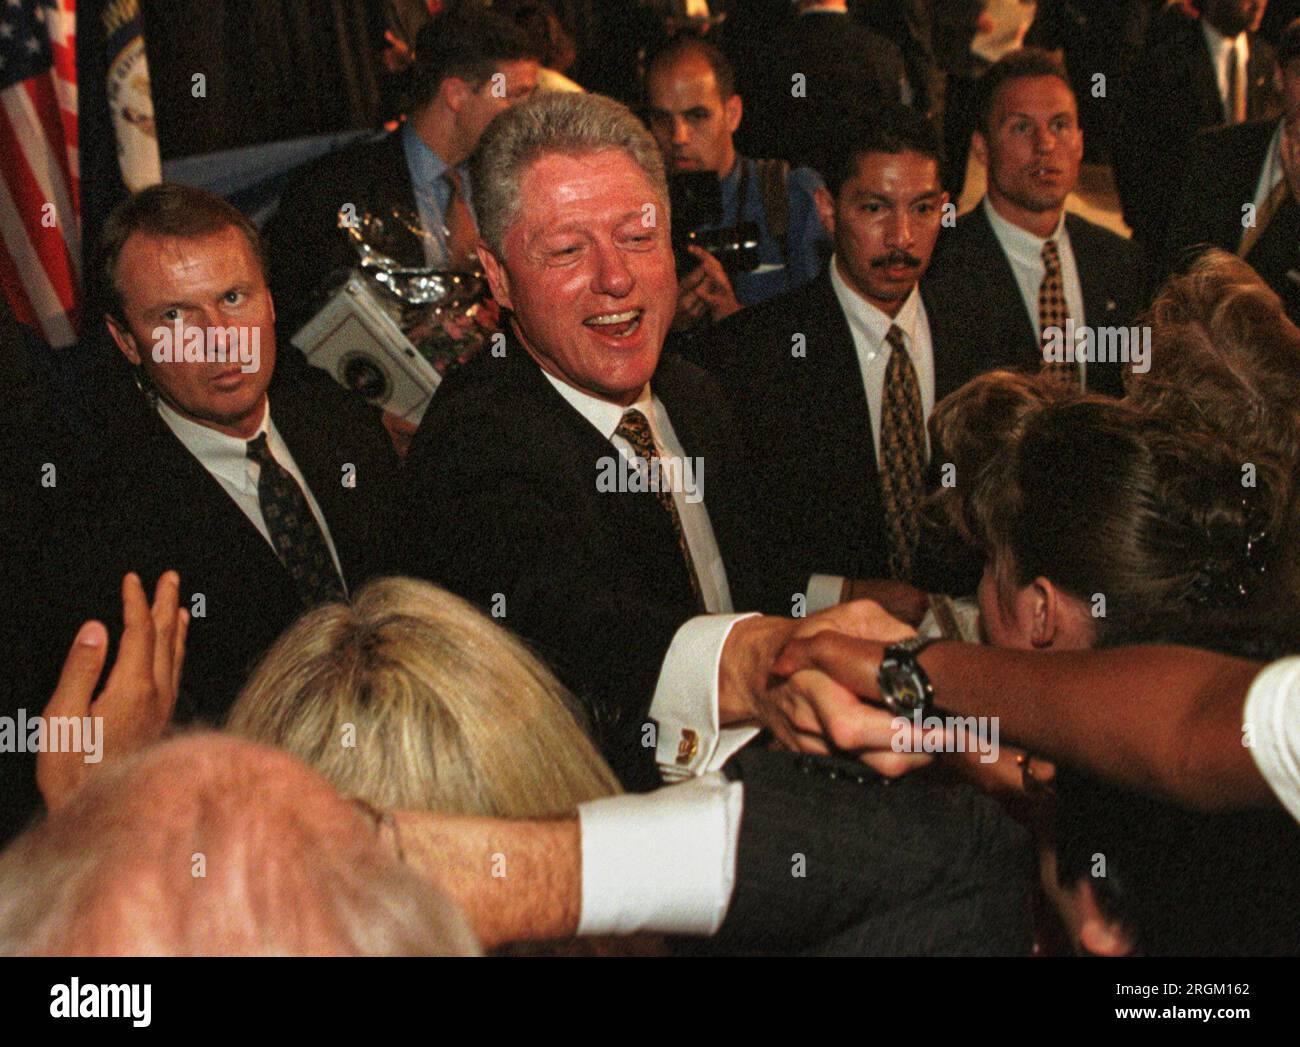 President Bill Clinton shakes hands with attendees while flanked by United States Secret Service agents after explaining his 'patients' bill of rights' initiative on Monday, Aug. 10, 1998 at the Commonwealth Convention Center in Louisville, Jefferson County, KY, USA. Clinton said the proposed legislation would help protect the confidentiality of people's personal medical details, among other things. (Apex MediaWire Photo by Billy Suratt) Stock Photo